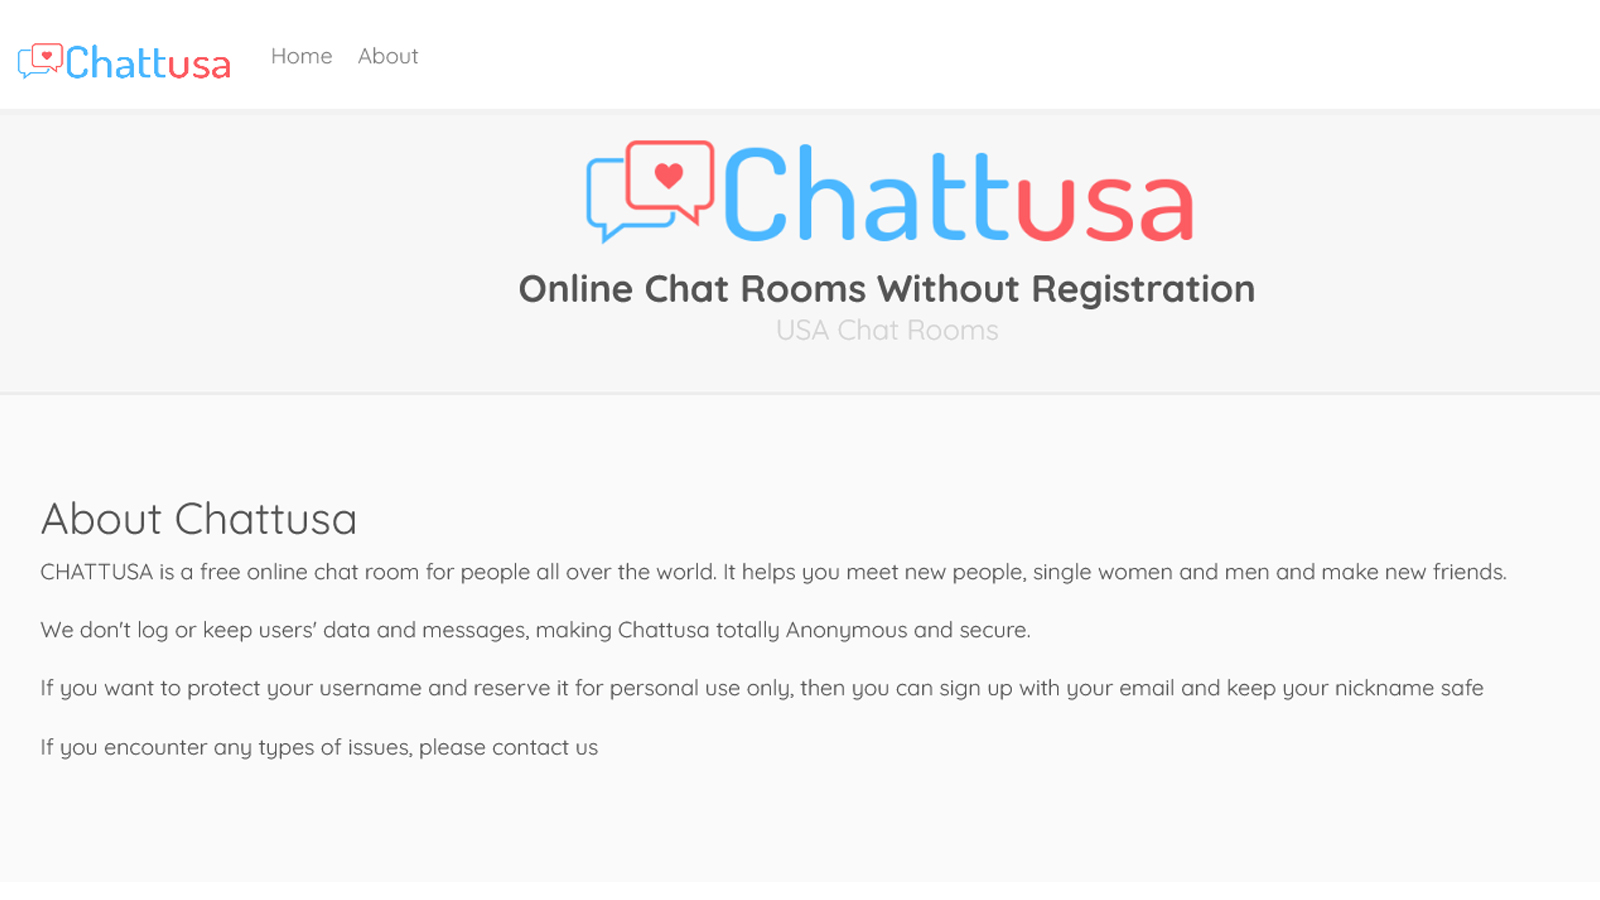 Find pricing, reviews and other details about Chattusa